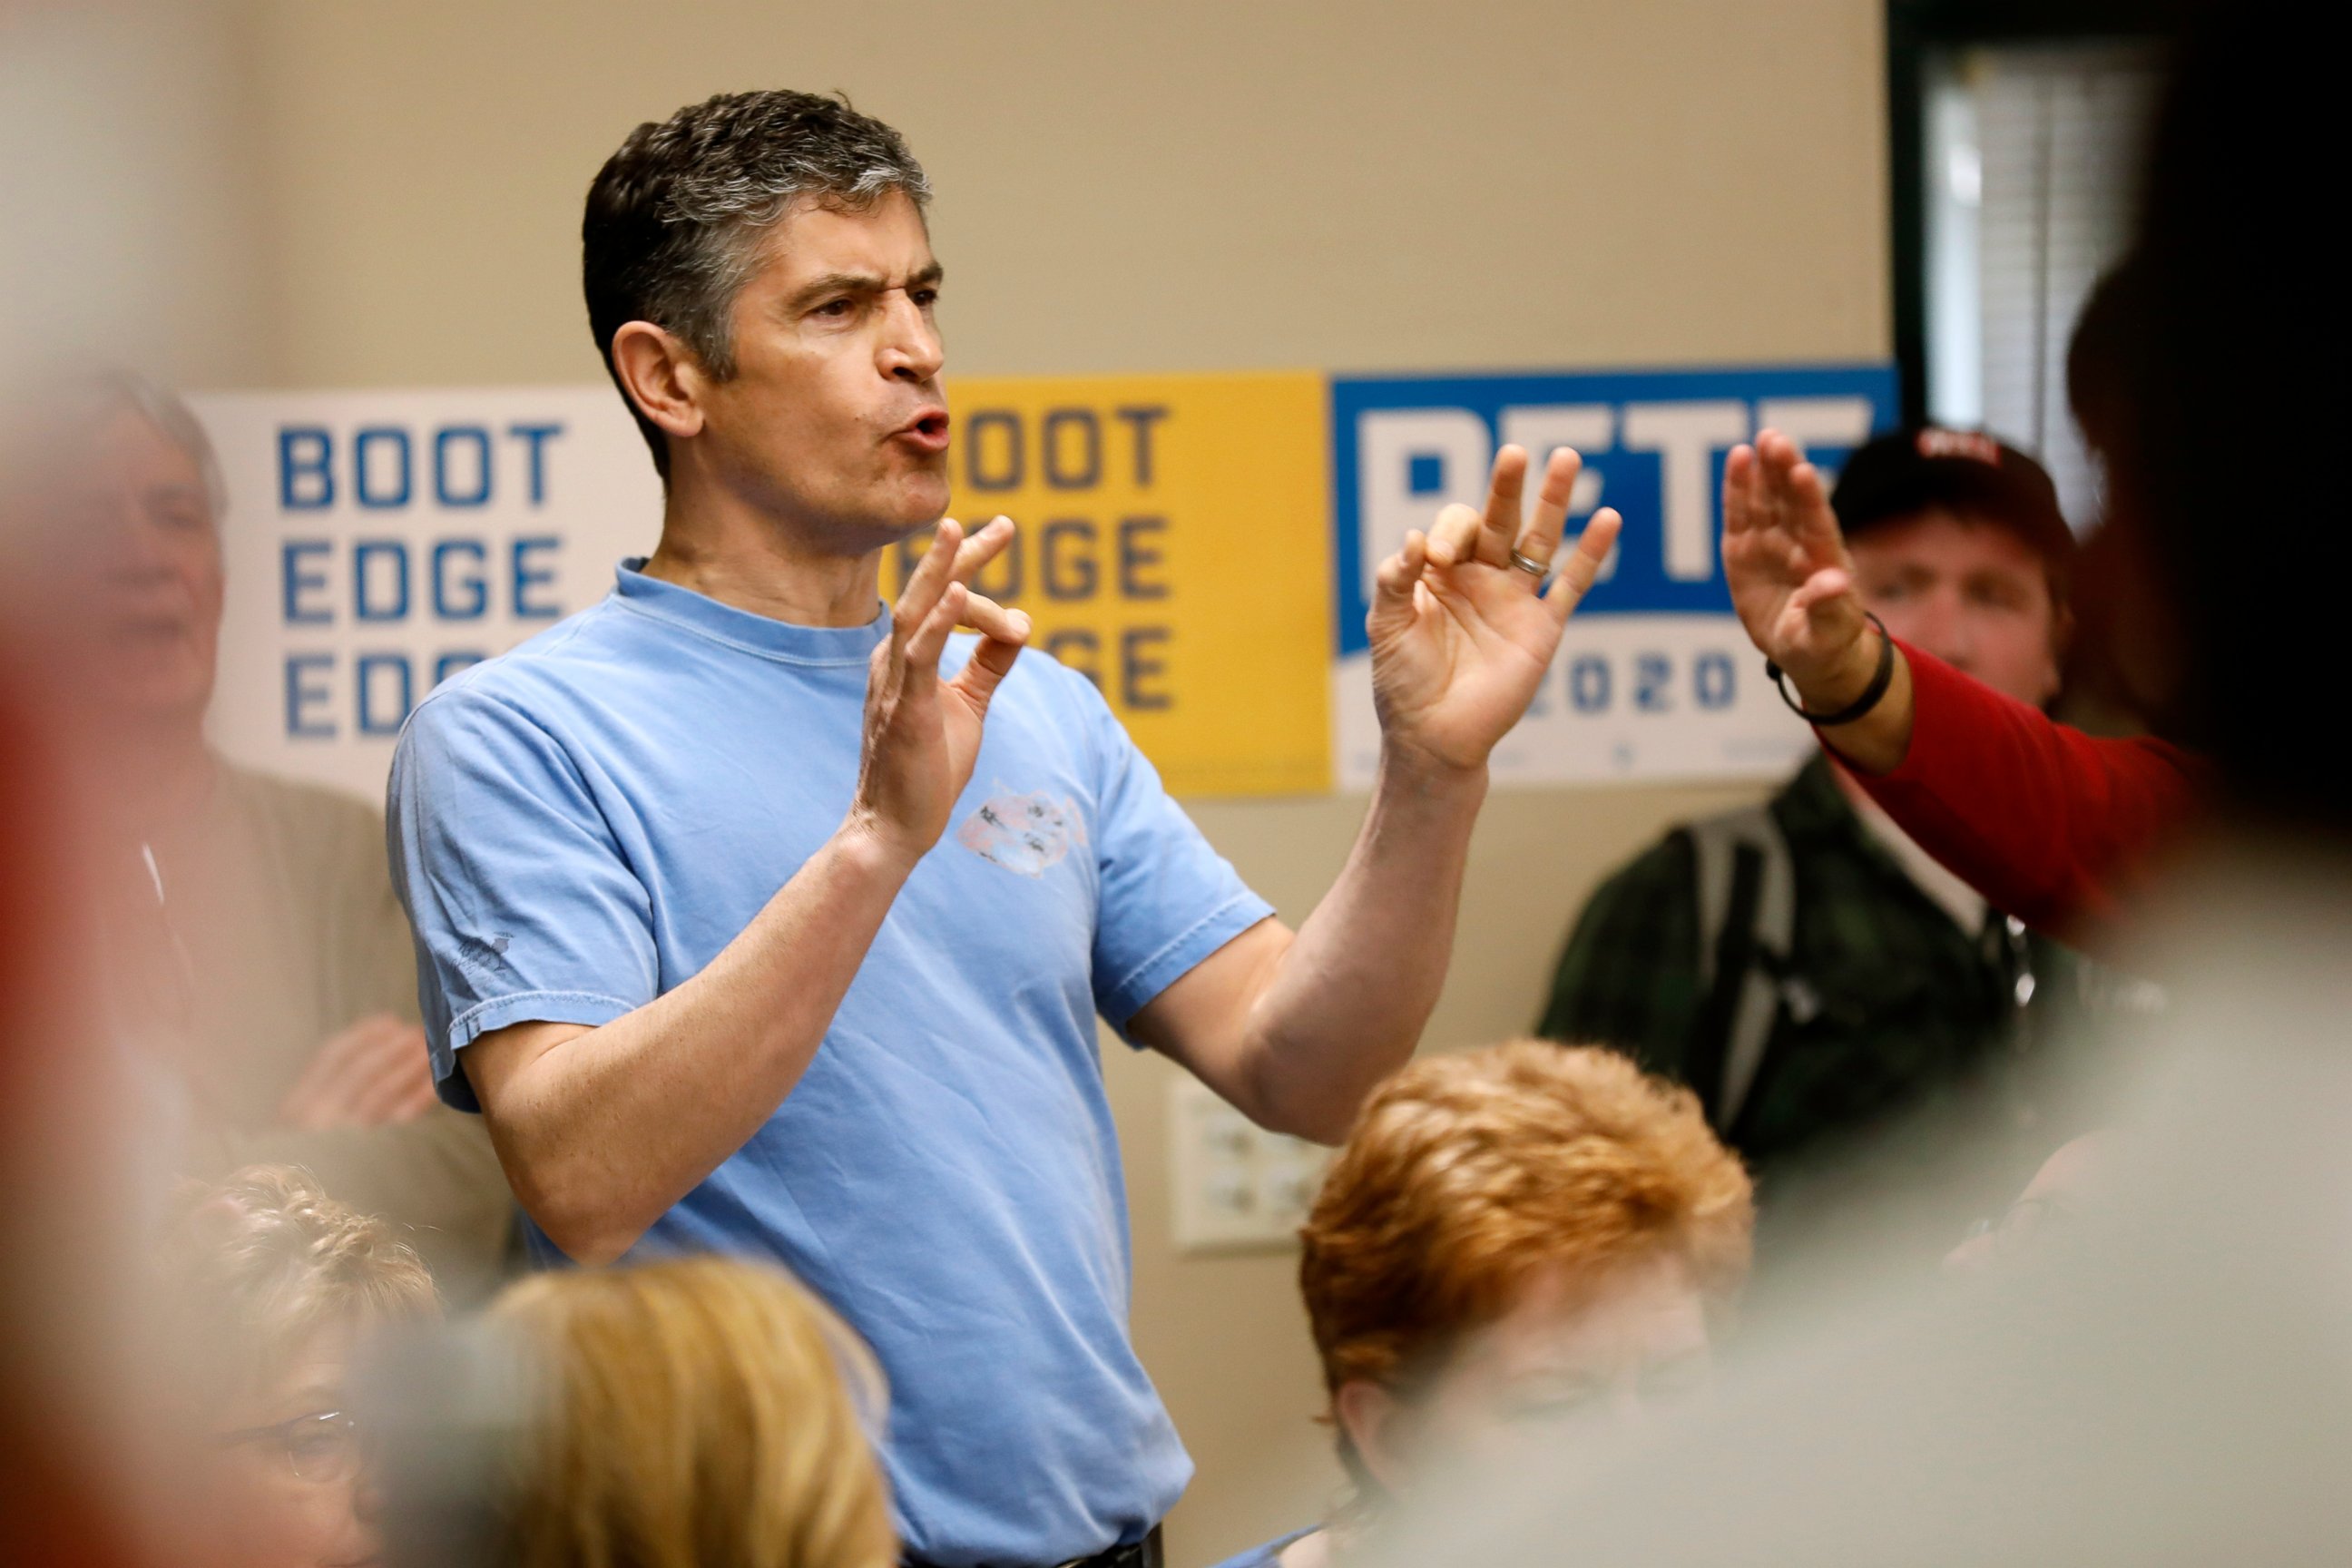 A protester shouts as 2020 Democratic presidential candidate, South Bend Mayor Pete Buttigieg speaks during a town hall meeting, Tuesday, April 16, 2019, in Fort Dodge, Iowa. 